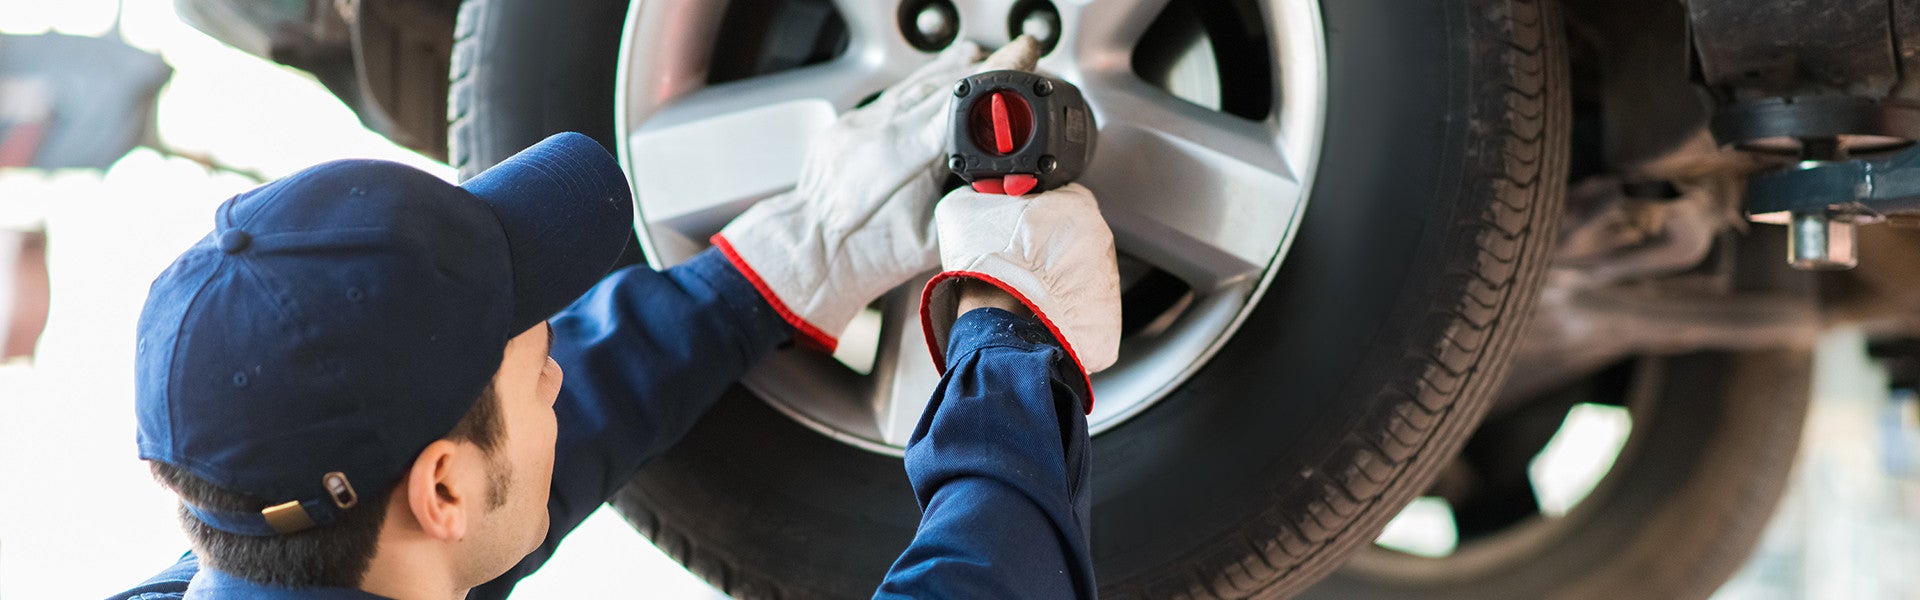 Brake Replacement and service in Johnstown, NY